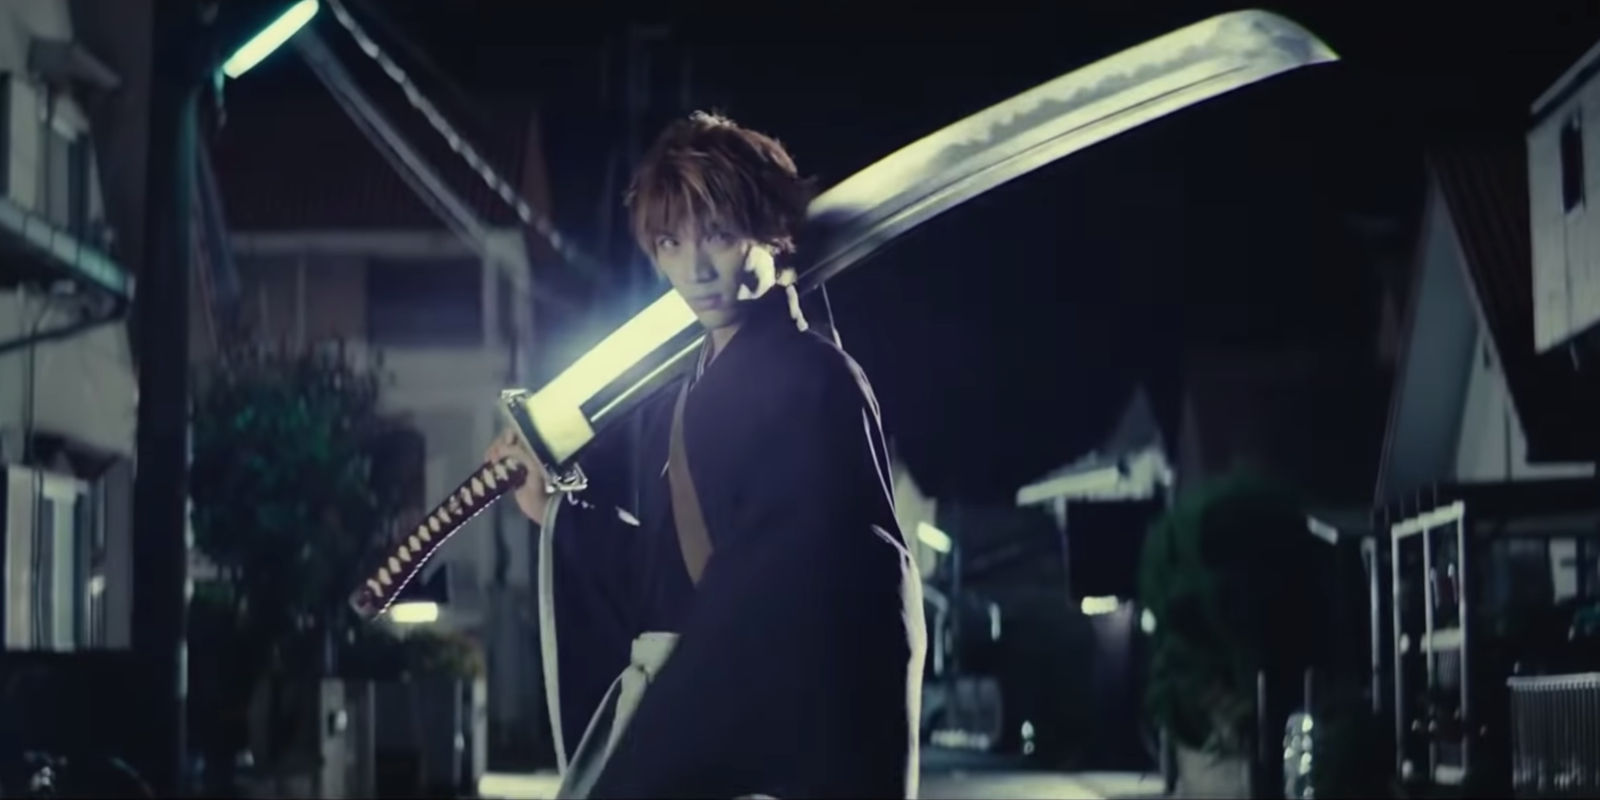 "Bleach" Review: The Epitome of Live-Action Anime Films